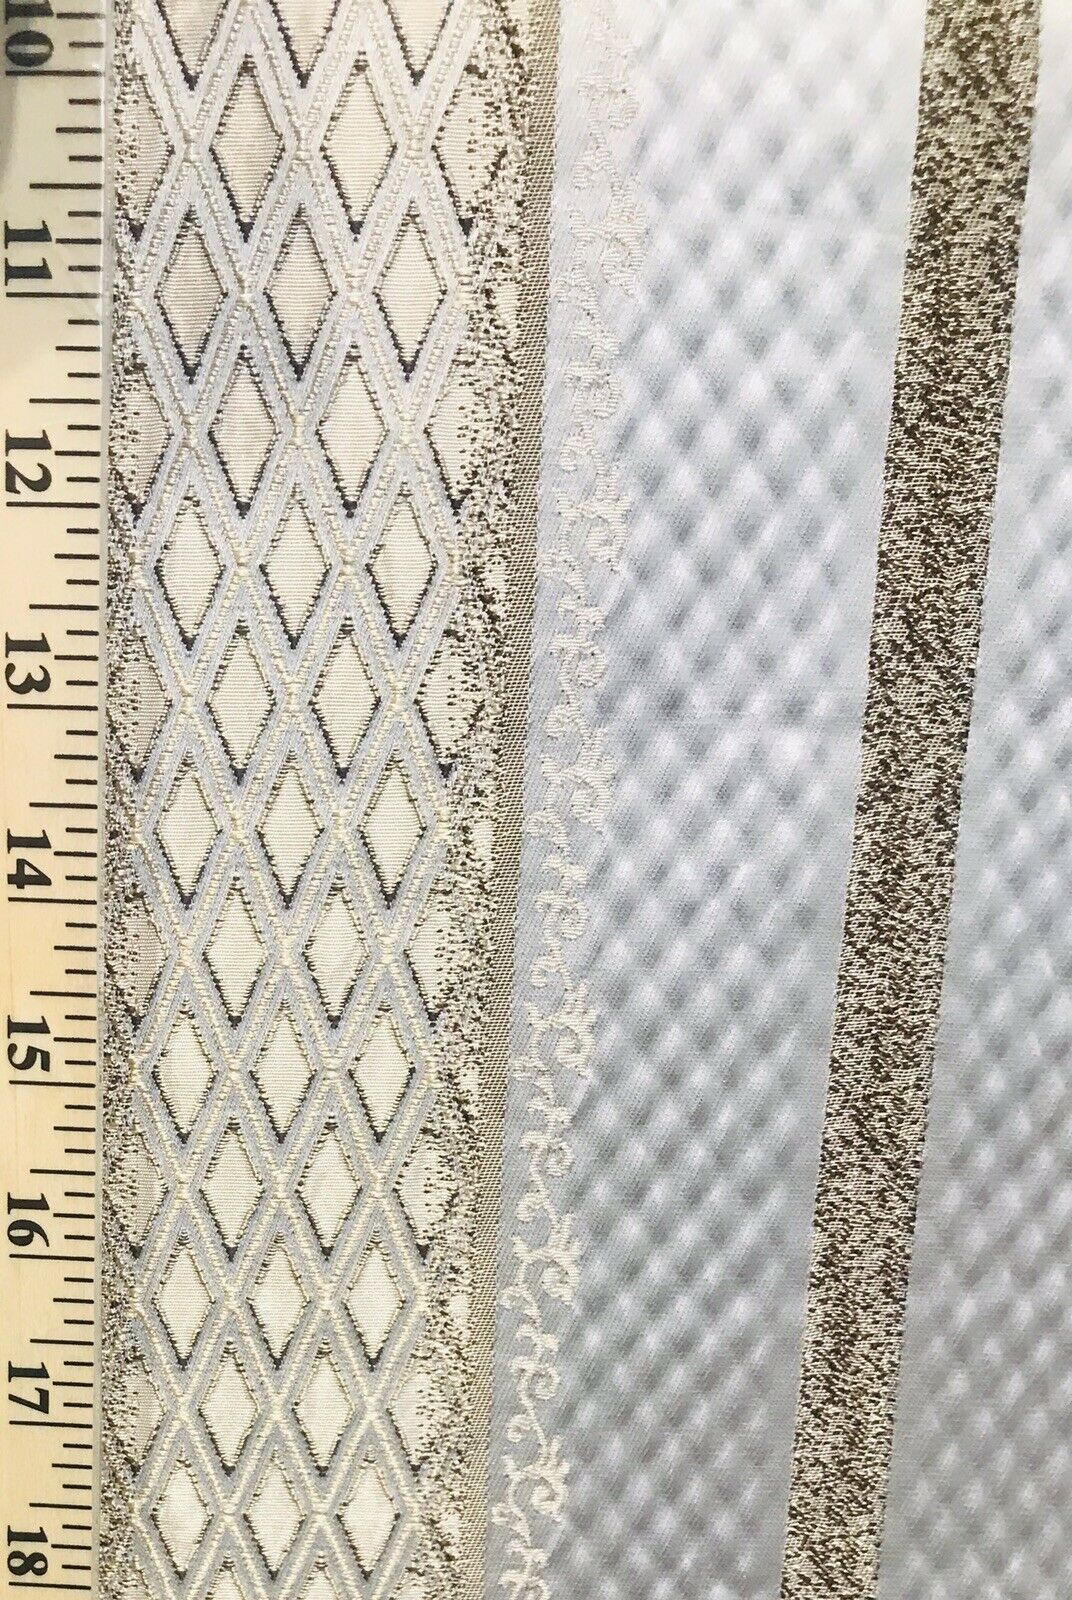 SALE Satin Stripe Mesh Lace Fabric 5926 White, by the yard